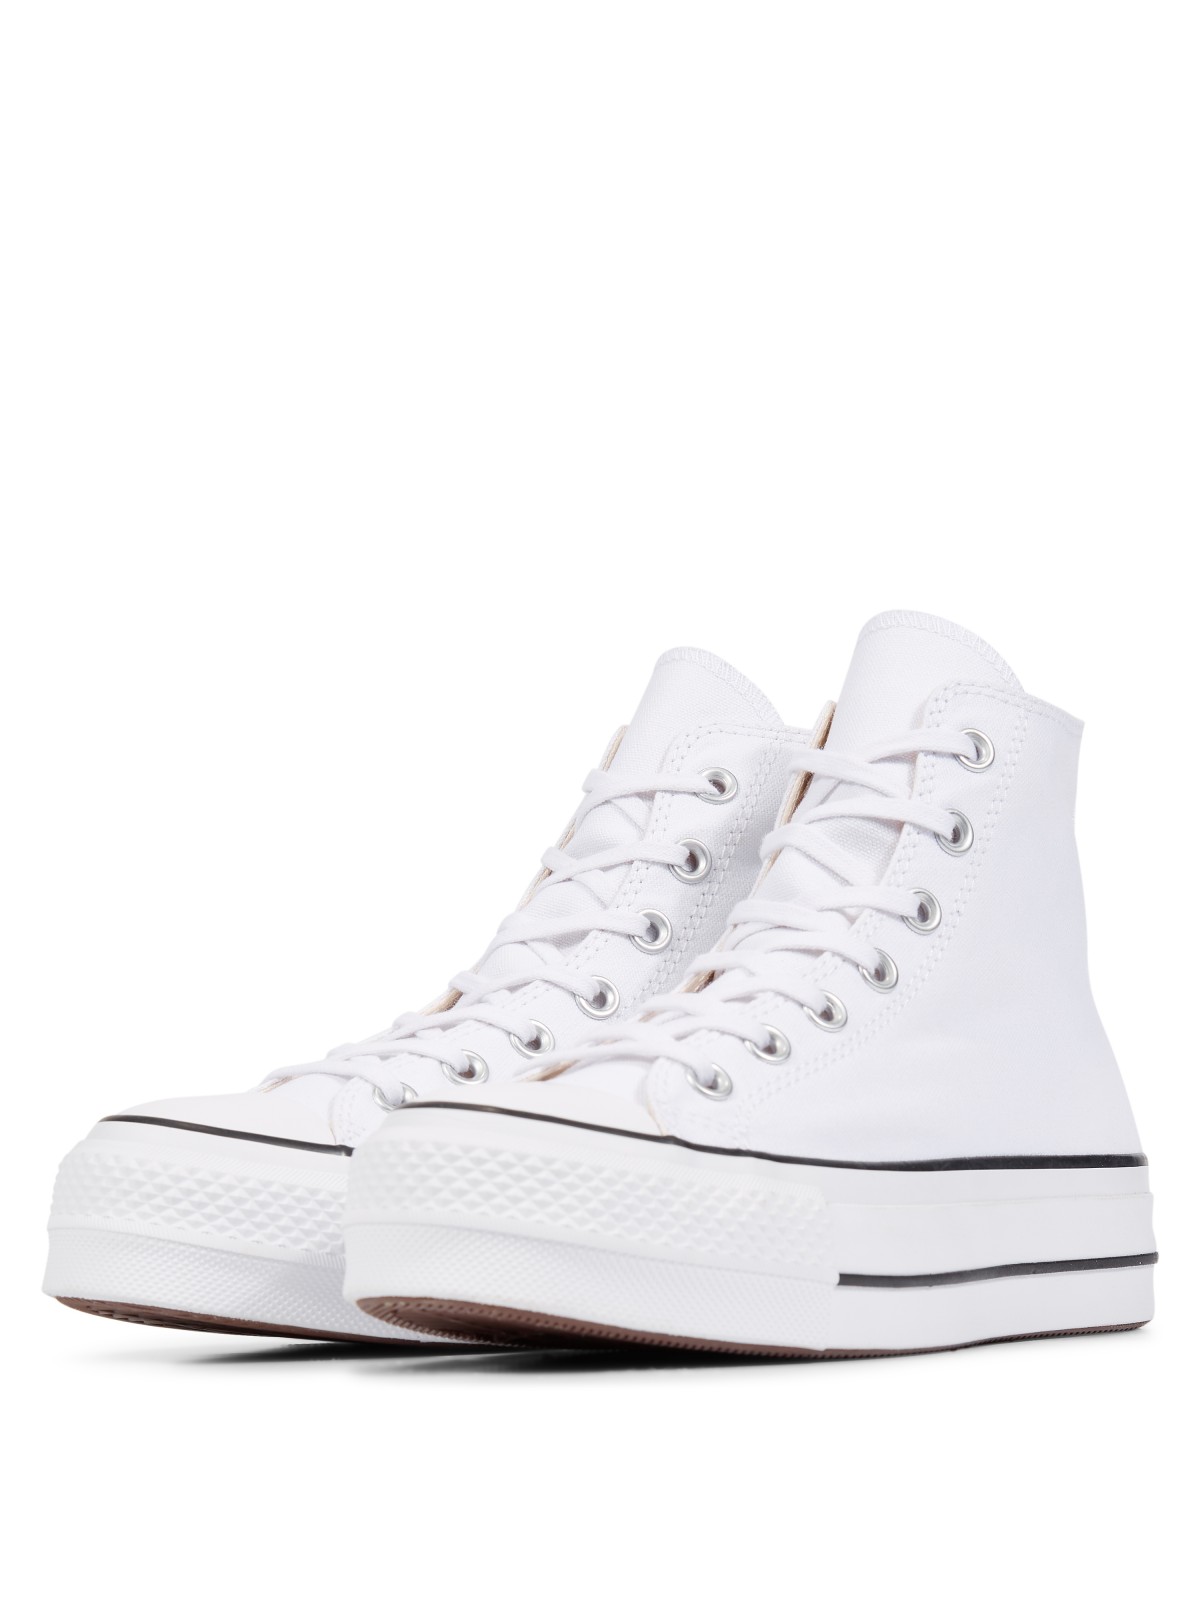 Converse Chuck Taylor all star Lift toile plateforme blanc ...